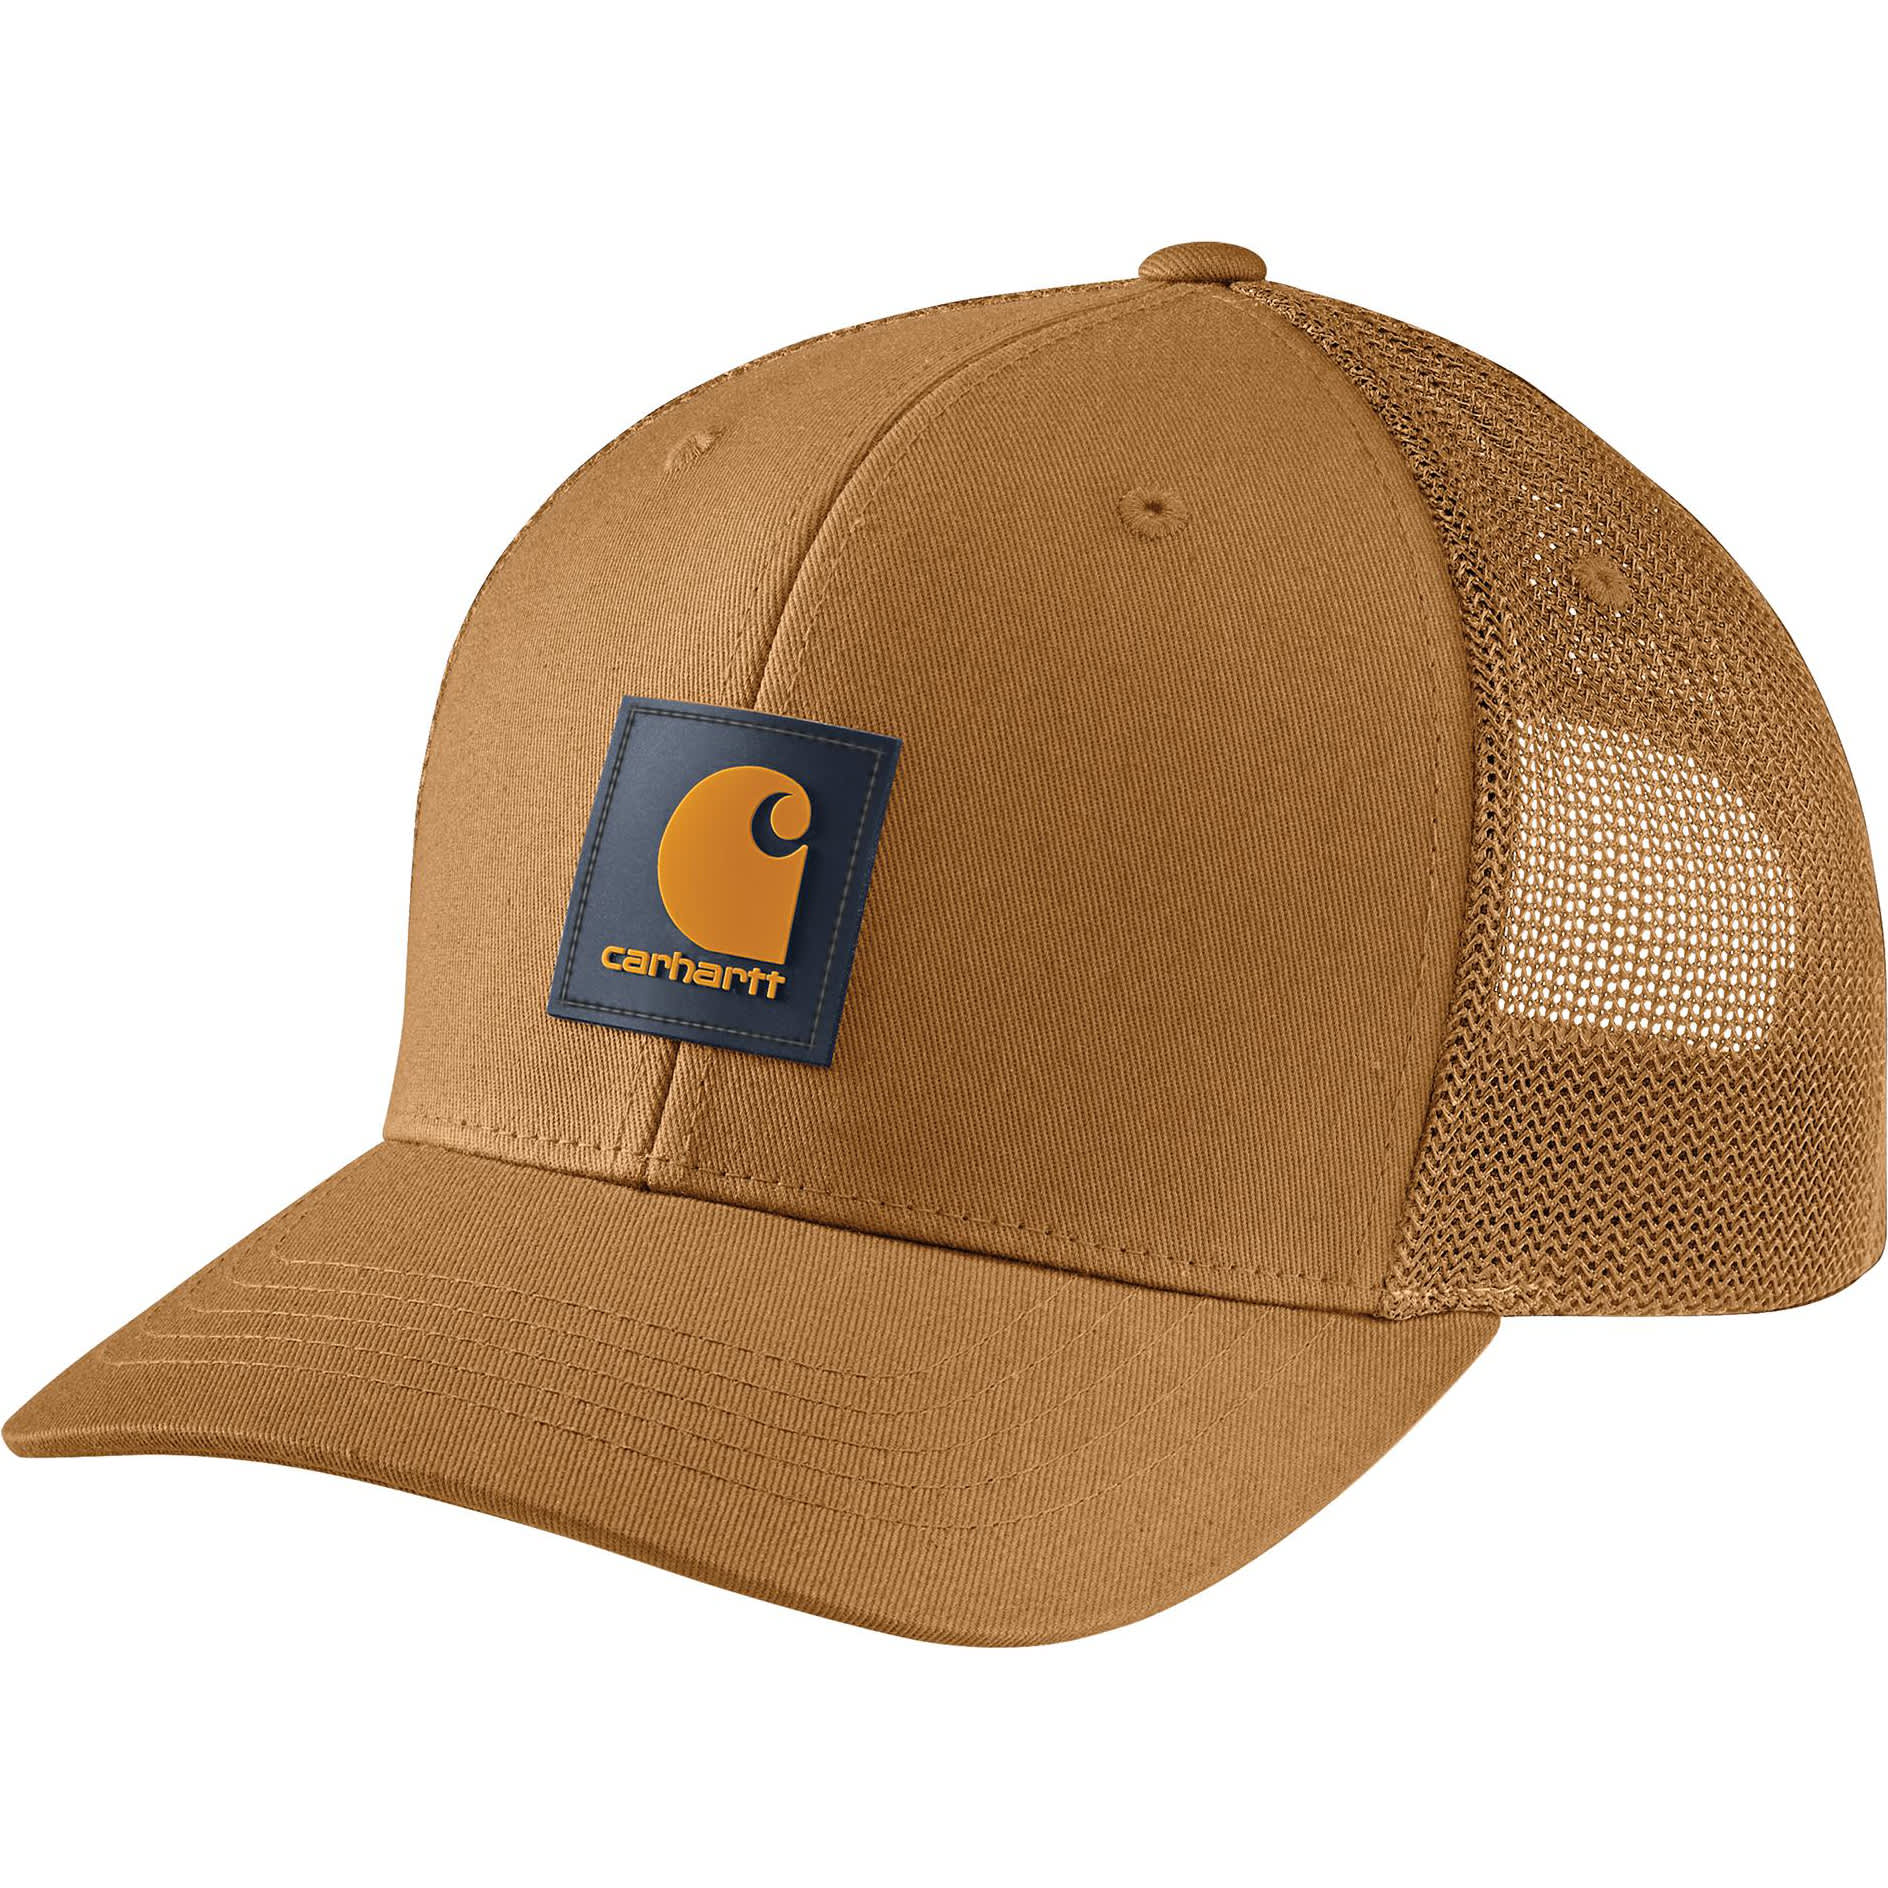 Carhartt Rugged Flex Twill Mesh-Back Logo Patch Cap at Tractor Supply Co.